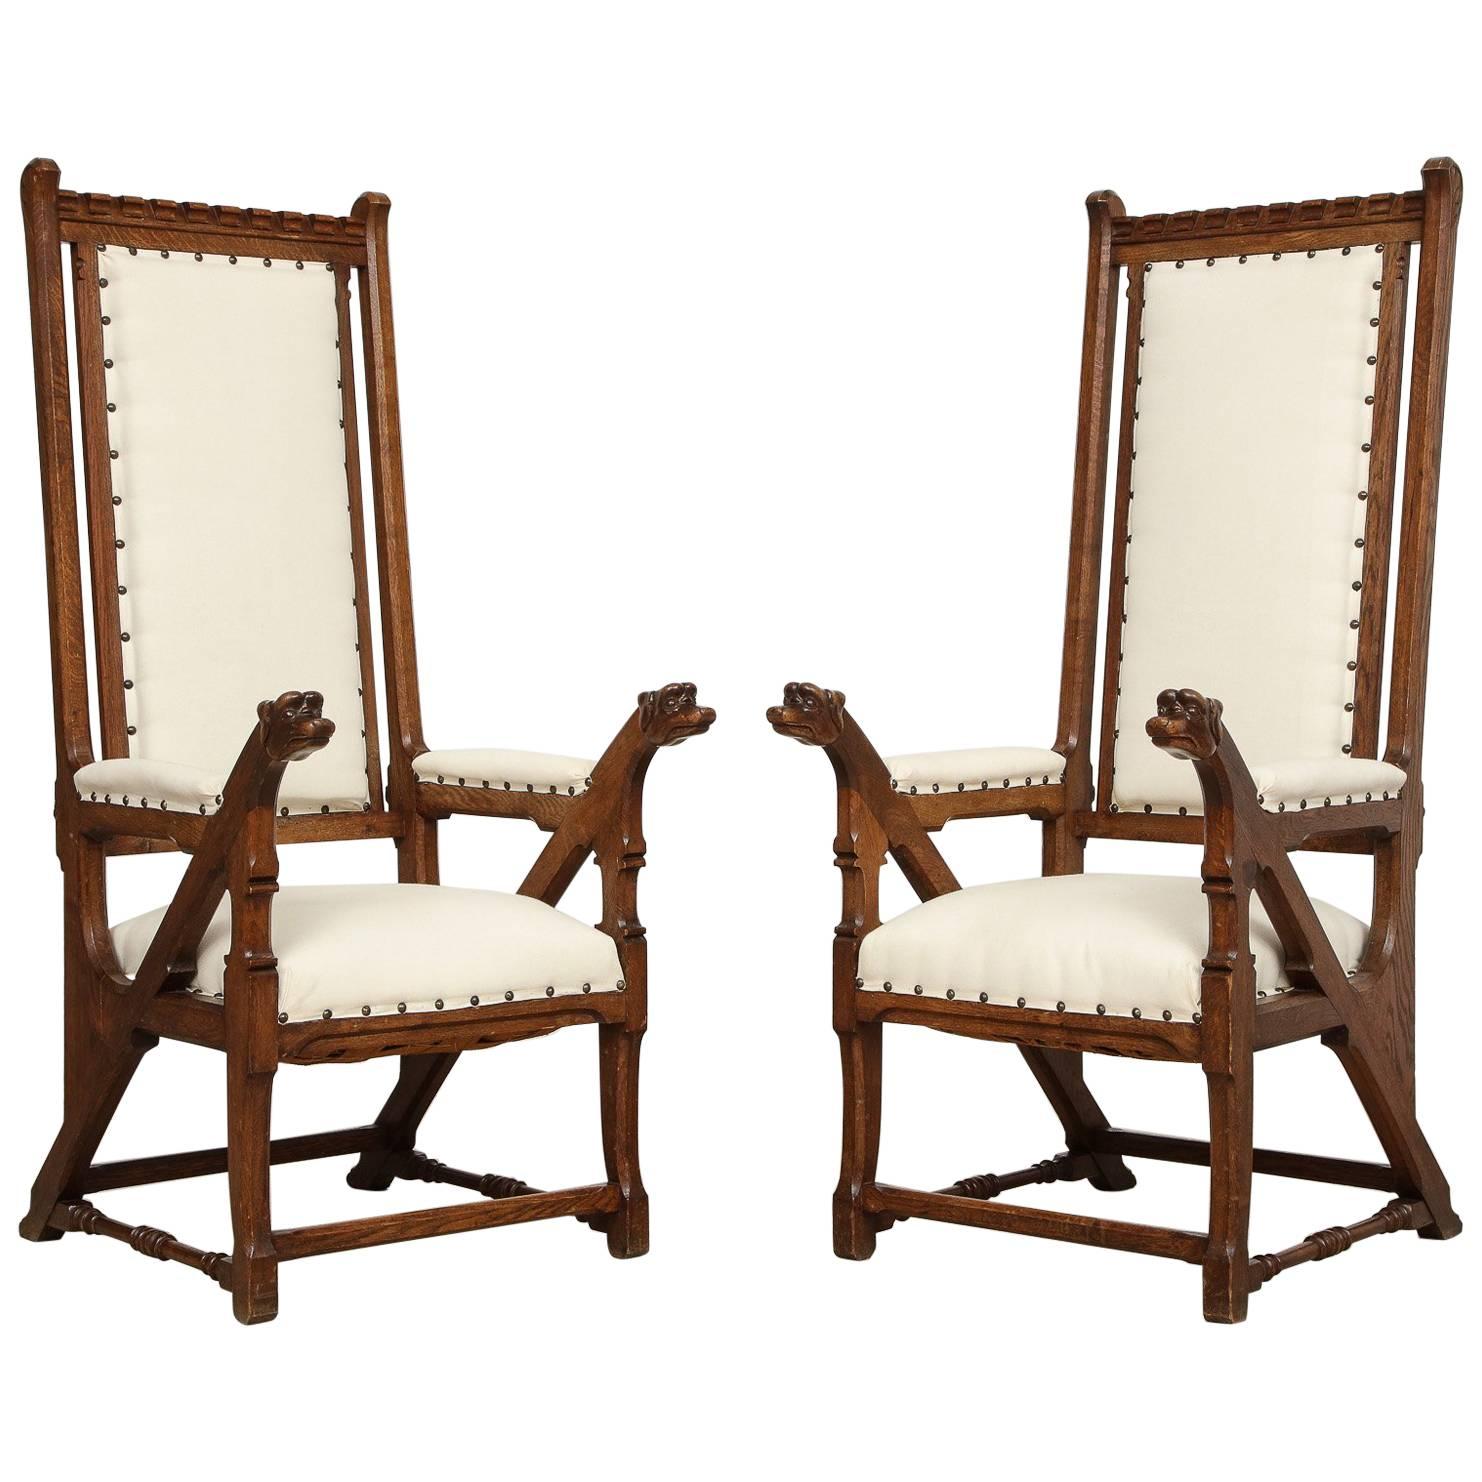 Norwegian Arts & Crafts Armchairs with Dog Heads, a Pair 'Two', circa 1890